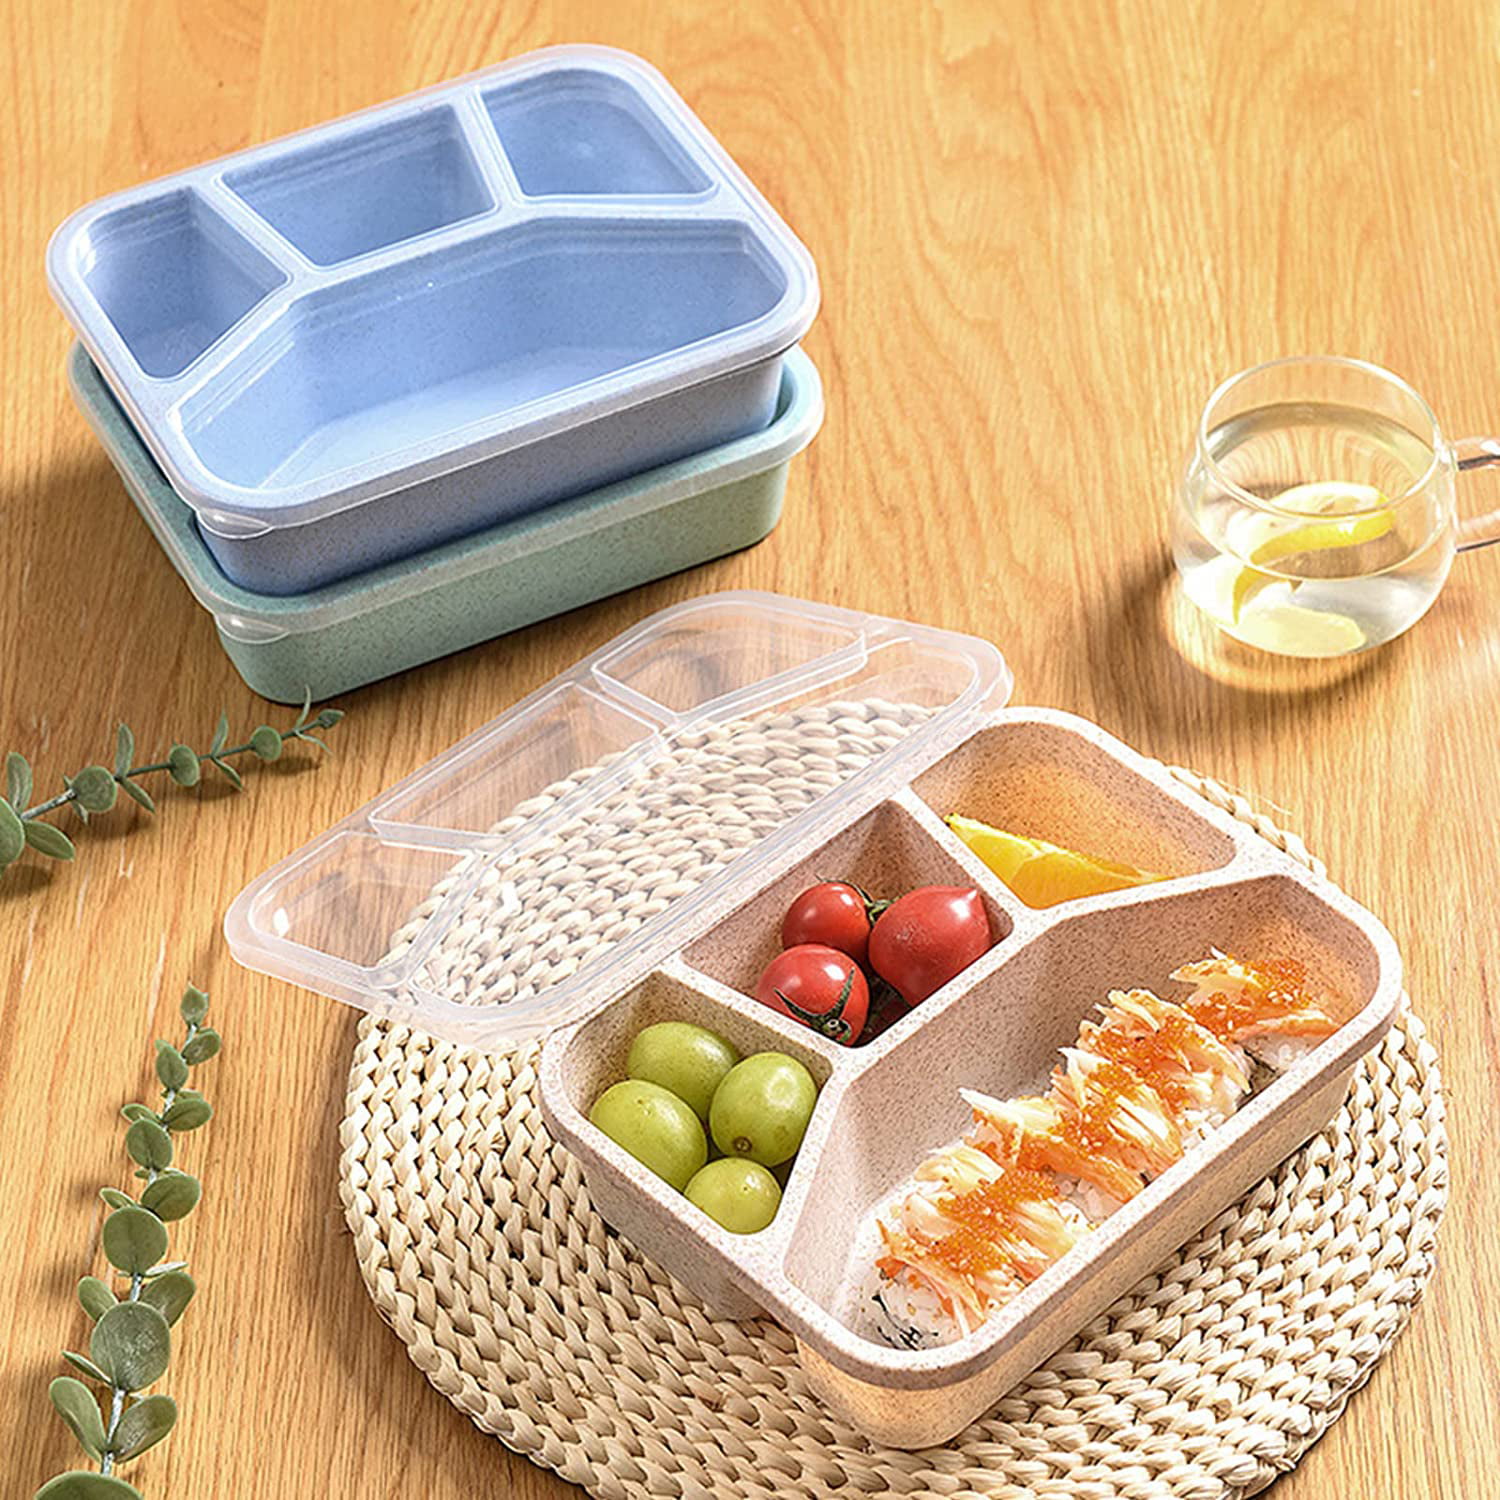 TRIANU Lunch Box Food Containers for Kids and Toddler, 4 Compartment Meal  Prep Containers Snack Containers, Divided Food Storage Containers for  School